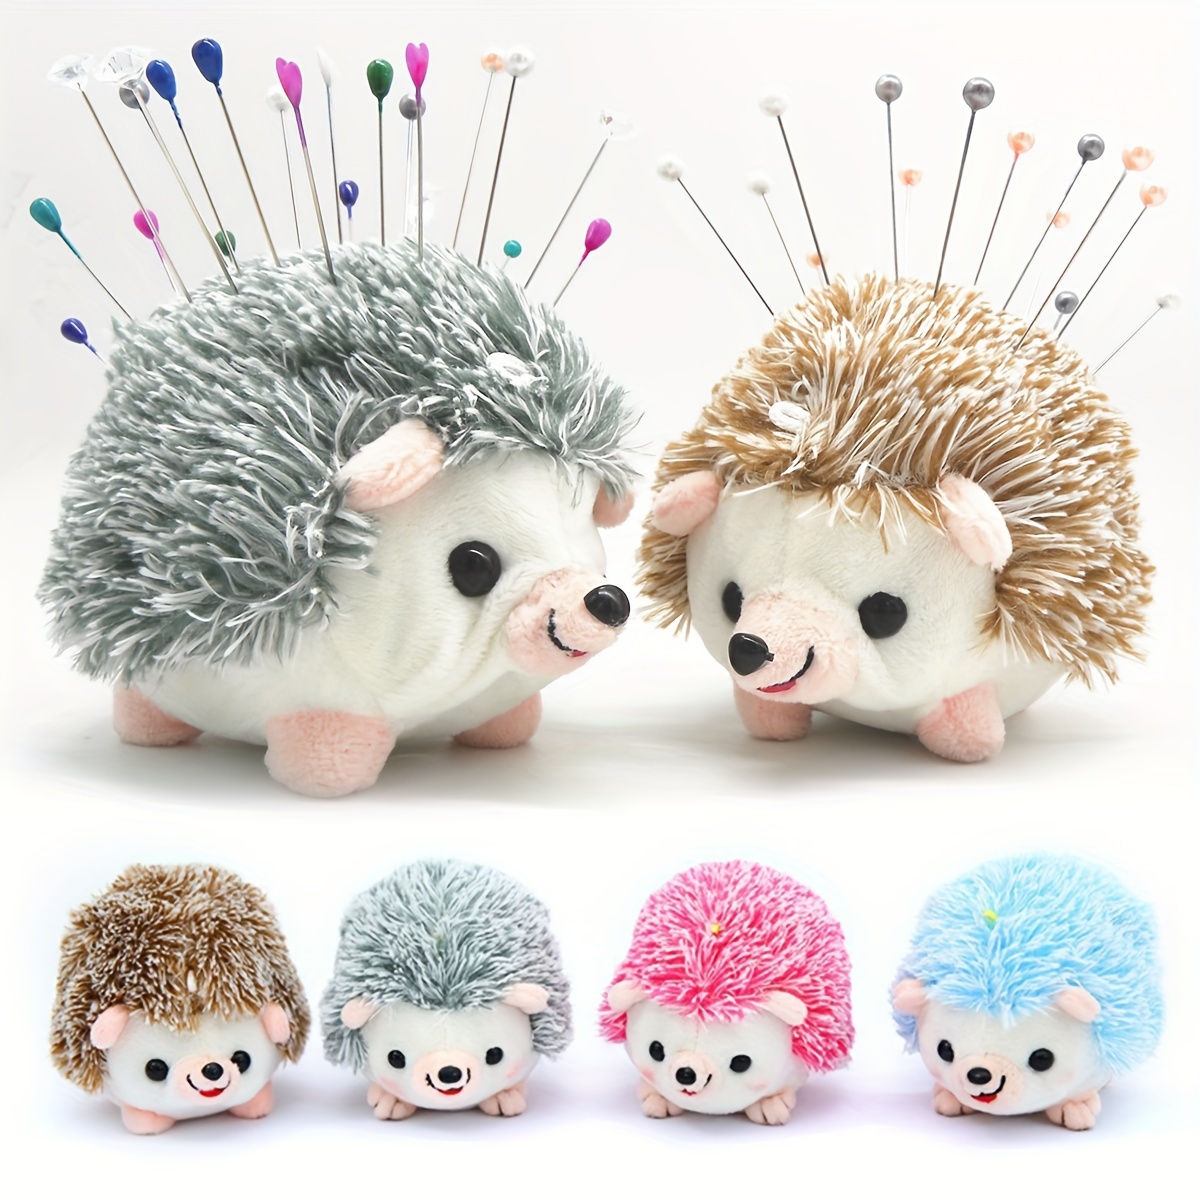 Hedgehog Shape Cute Pin Cushion for Sewing with Pins,250Pcs Pearlized Pins Straight  Pins with Colored Heads for Quilting